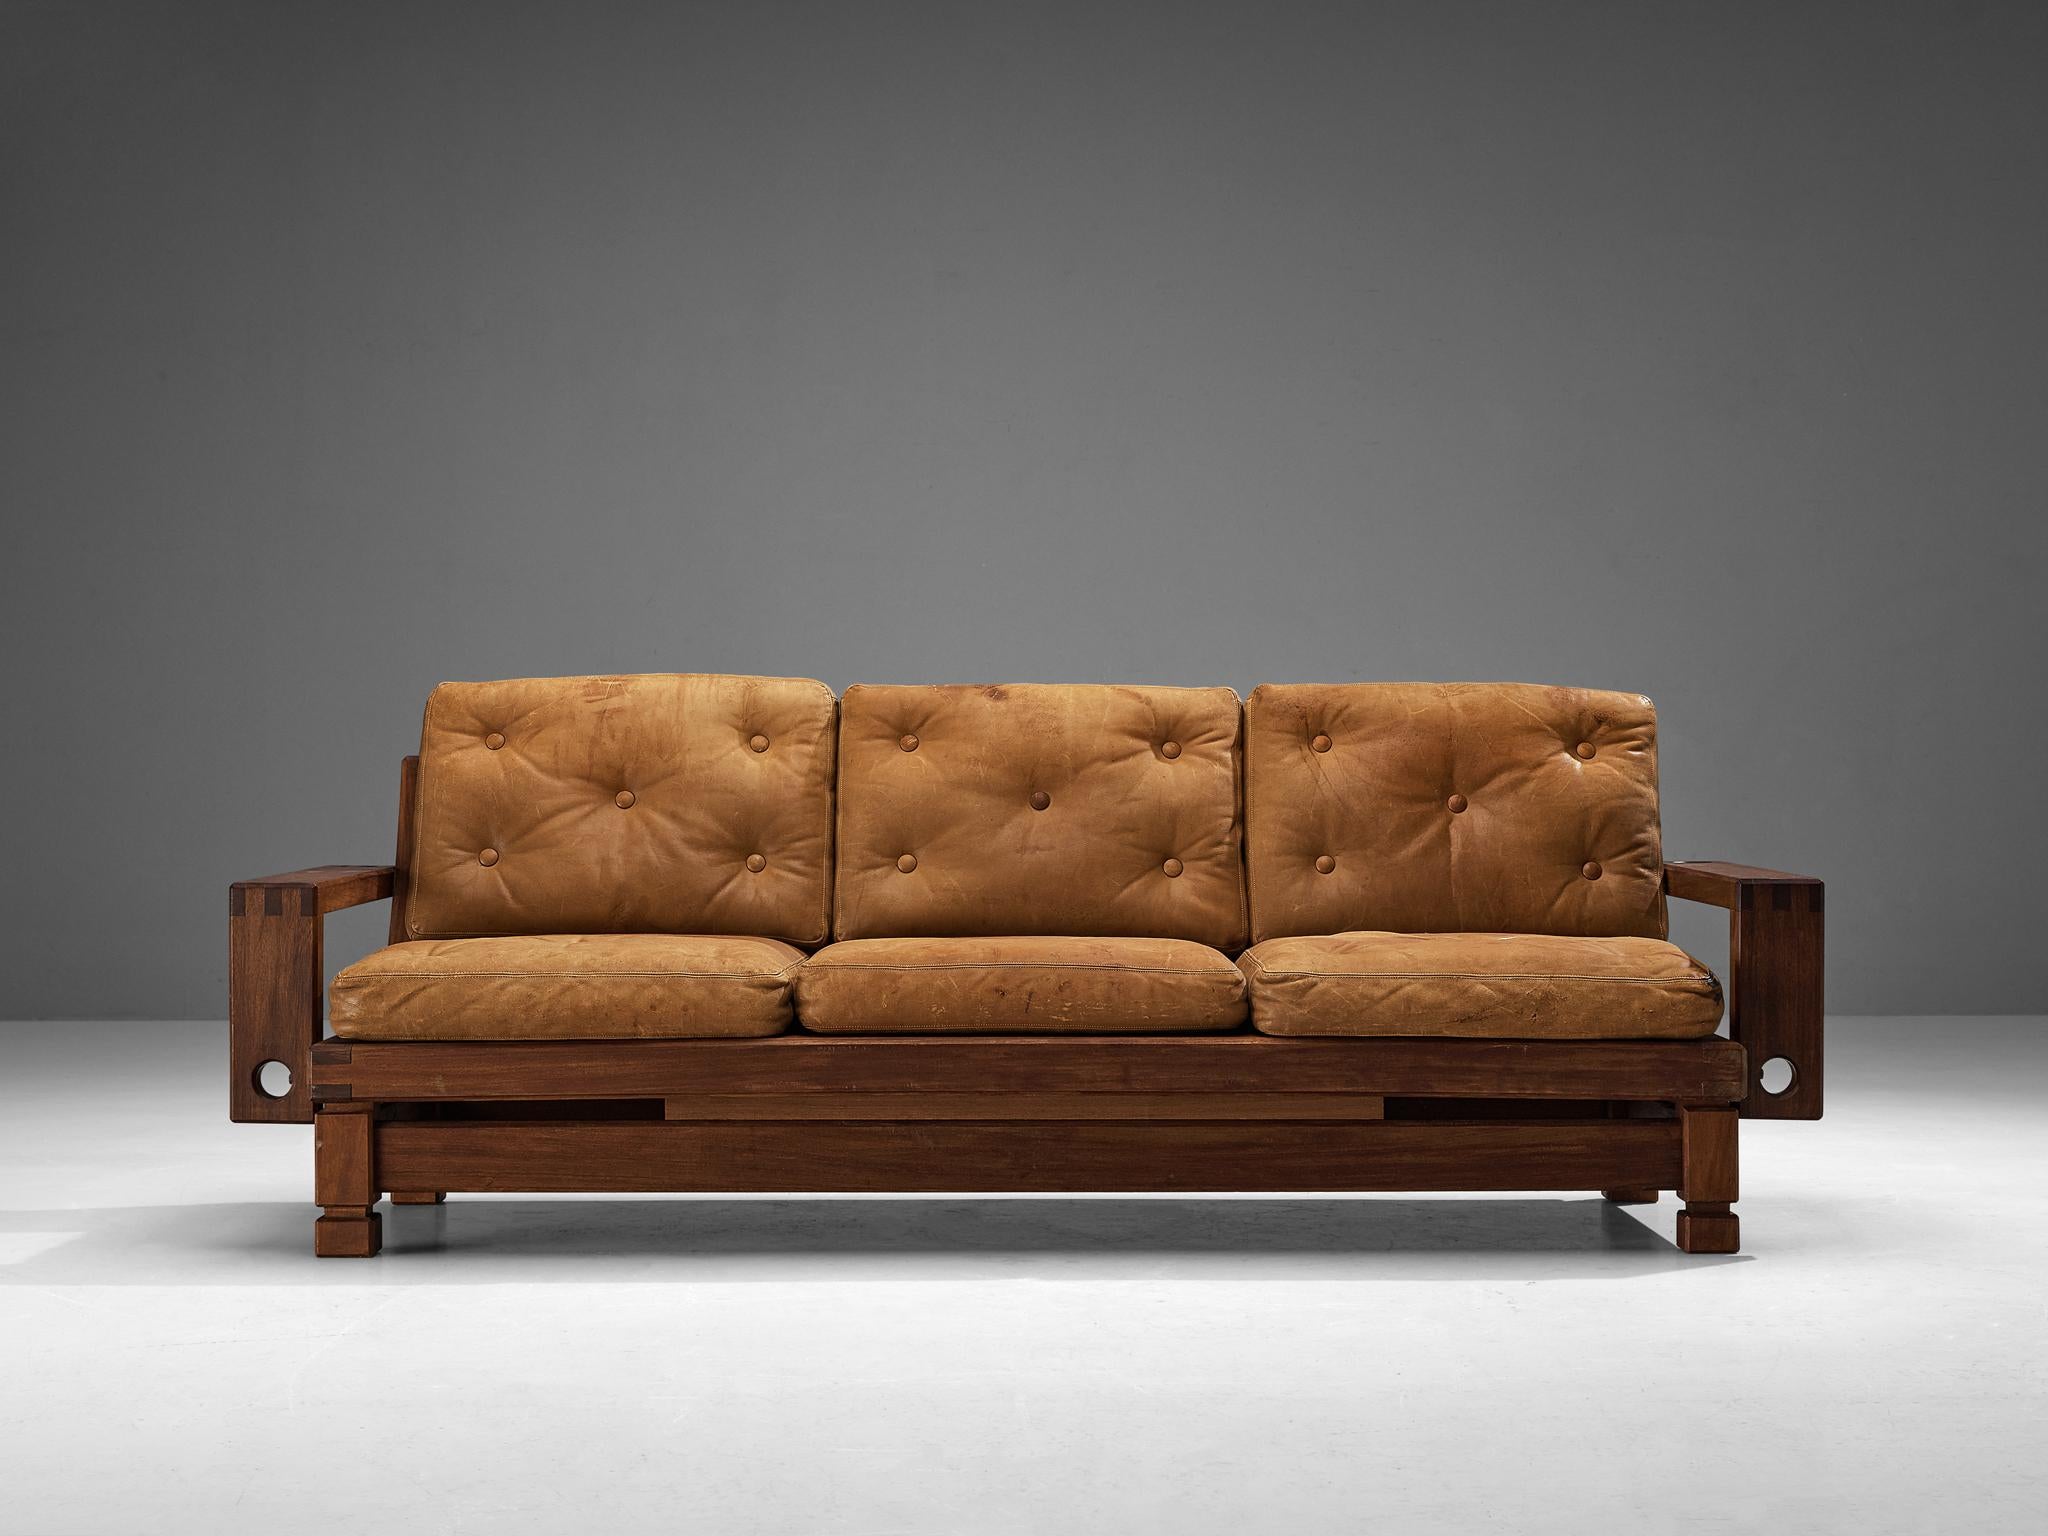 Sofa, teak, leather, France, 1960s

A French sofa defined by a pronounced geometric structure of clear lines and distinctive carvings. The wide armrests are detailed in a subtle manner holding well-proportioned apertures and the legs are